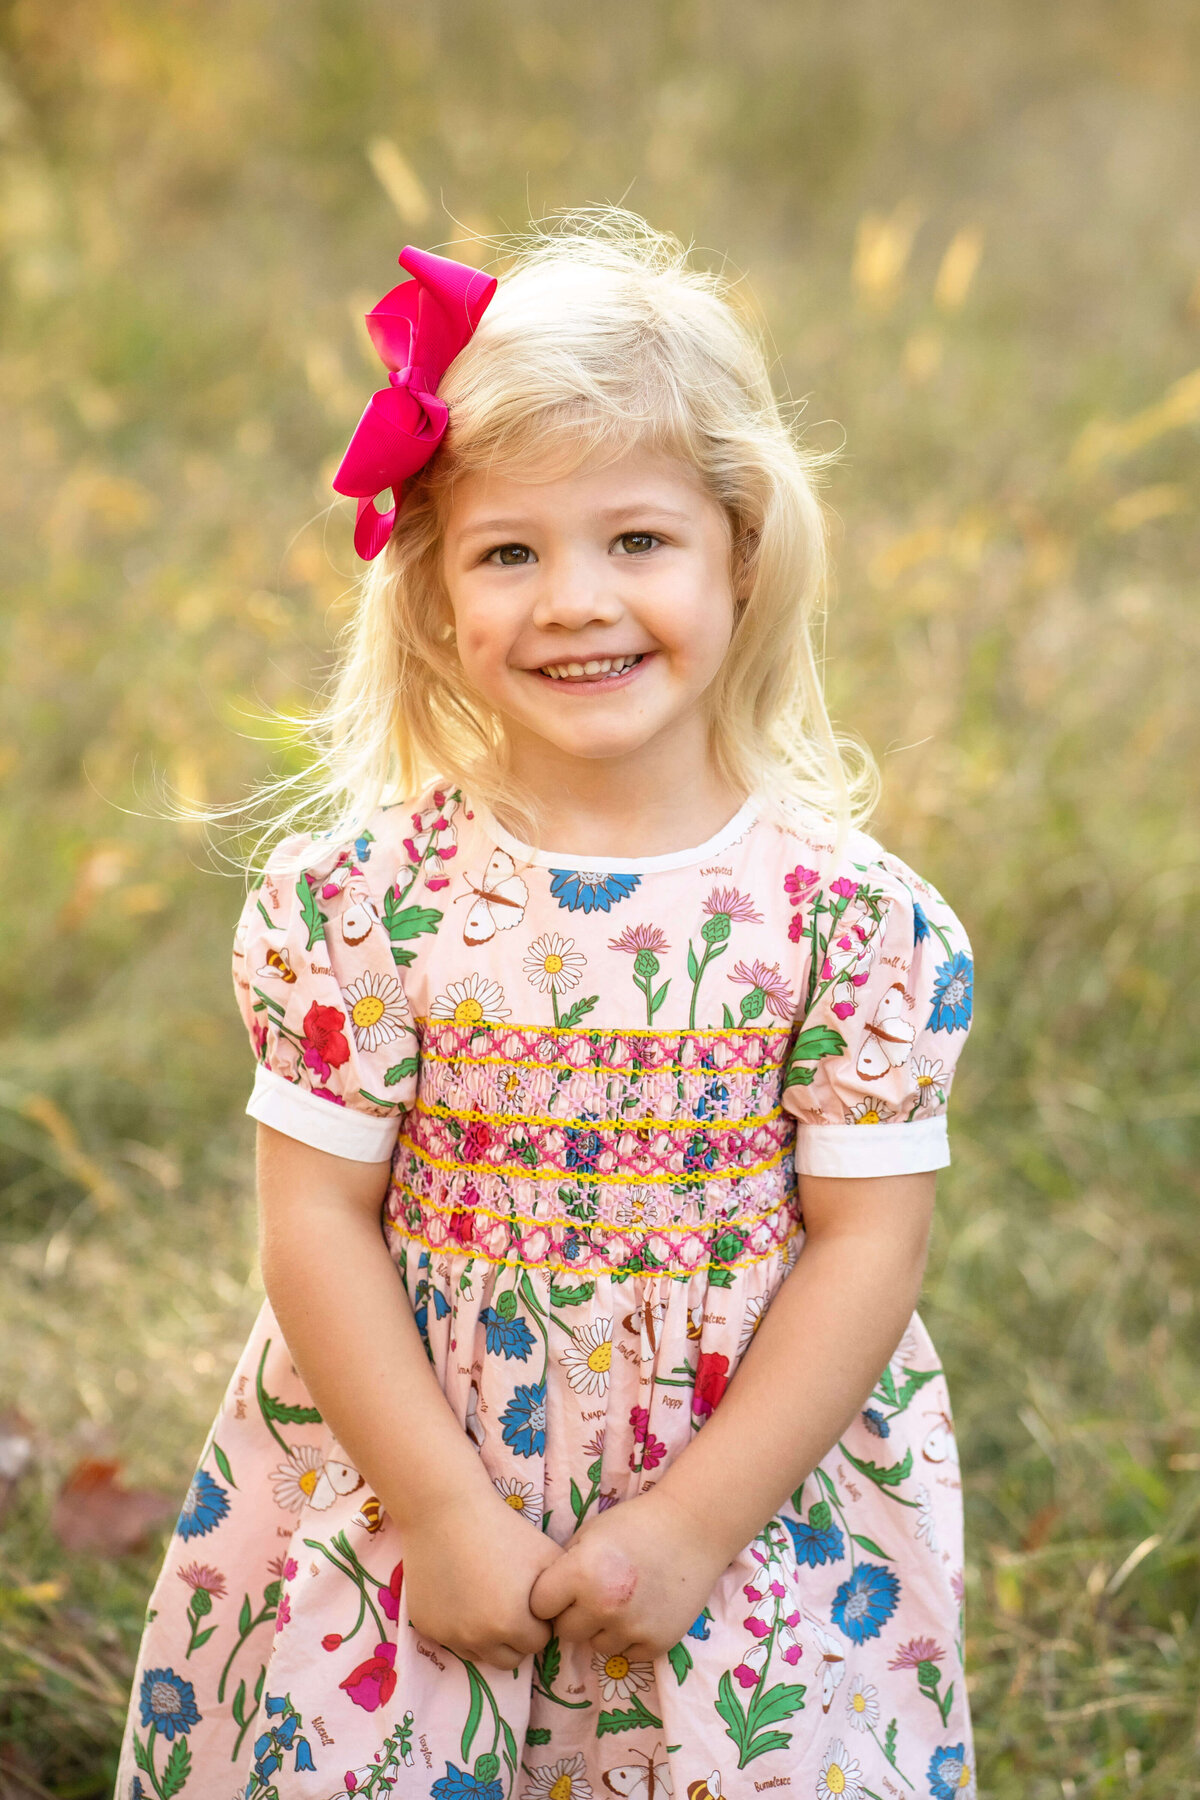 3 year old blond girl smiling at the camera in a field